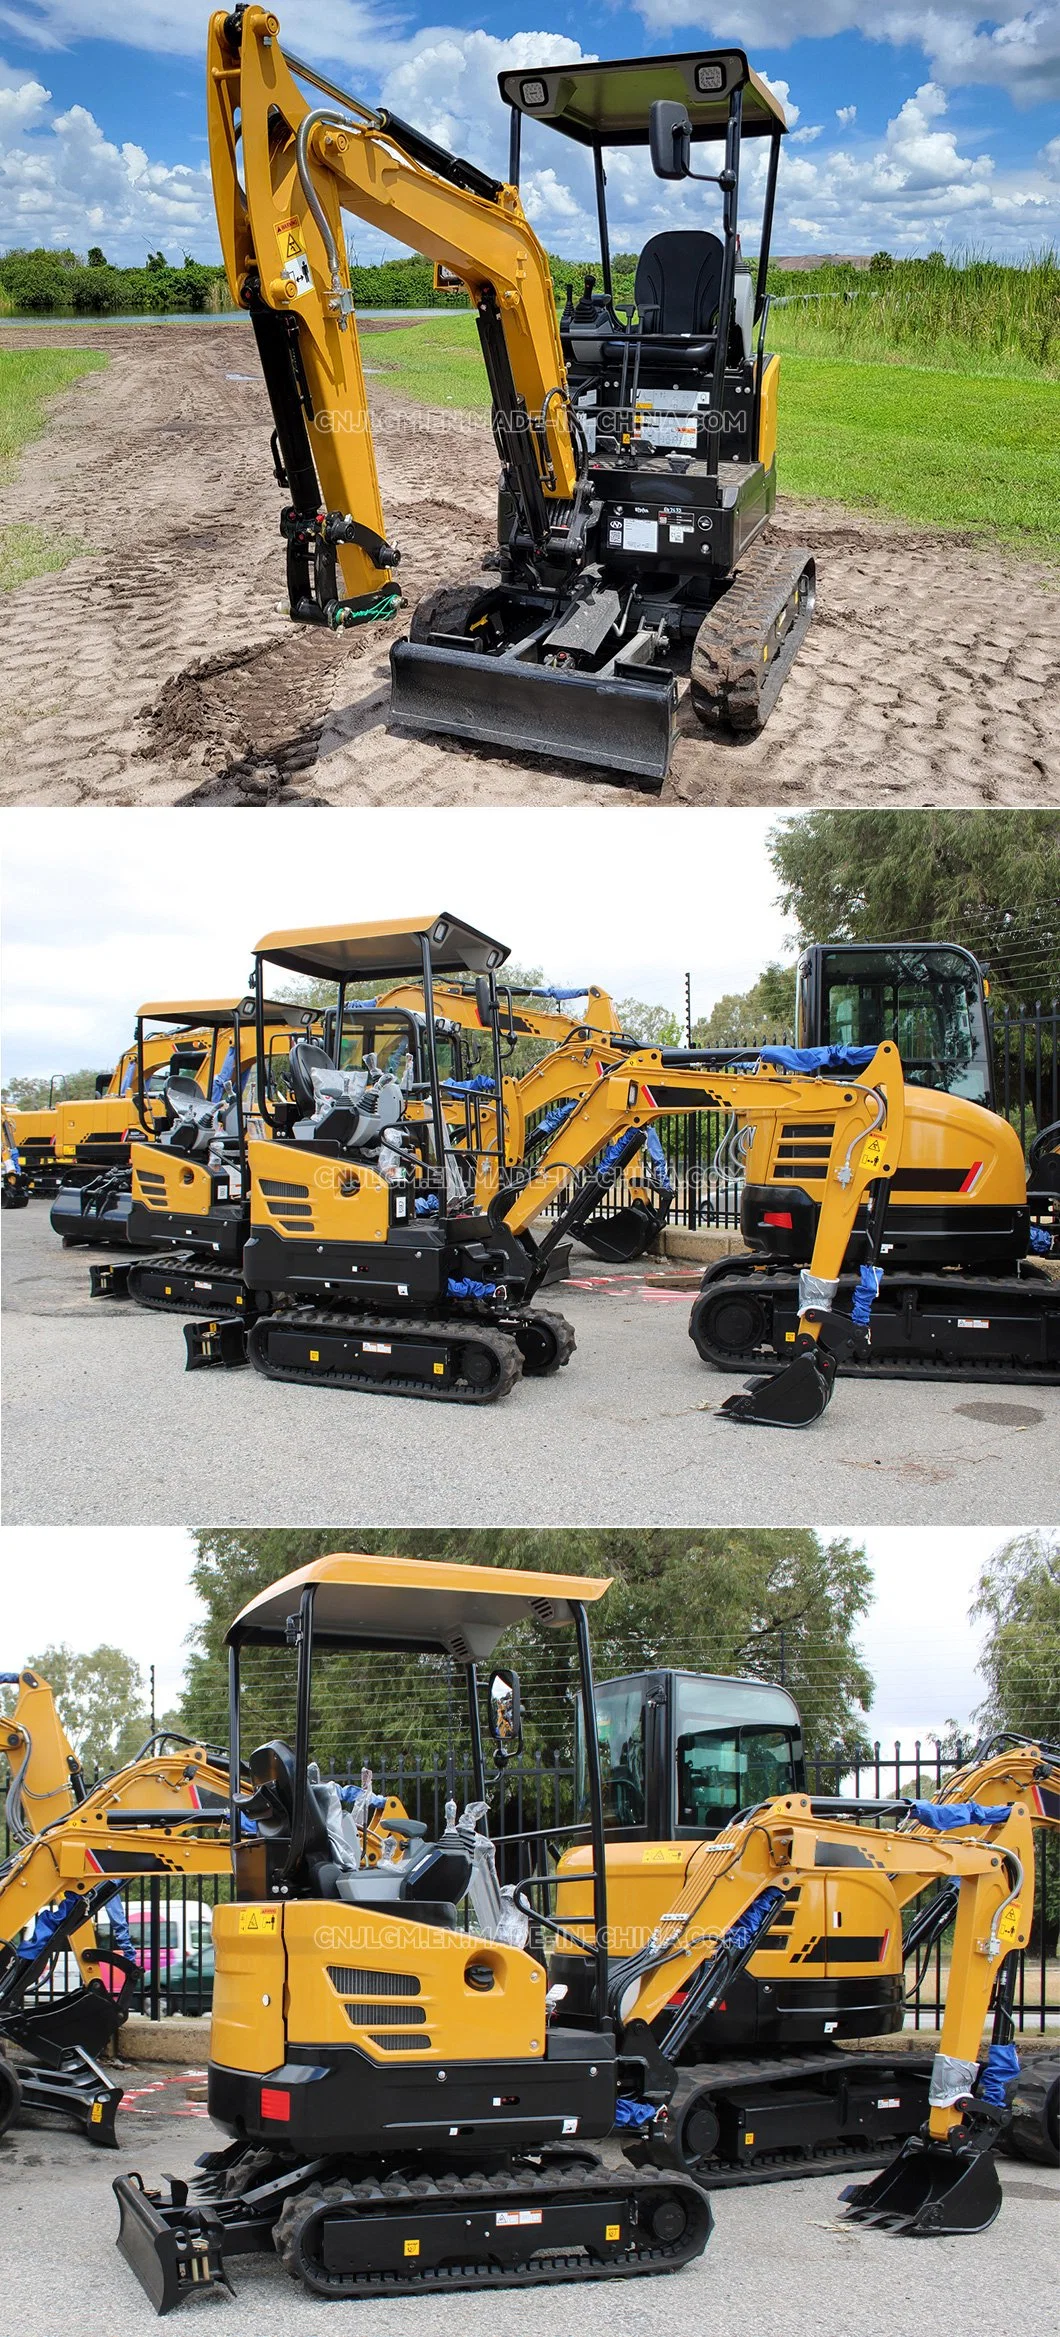 Cheap 1.8/2 Ton Crawler Tracks Hydraulic Micro Mini Garden Excavator Diesel or Electric Micro Digger Small Bagger Machine with Cab for Sale